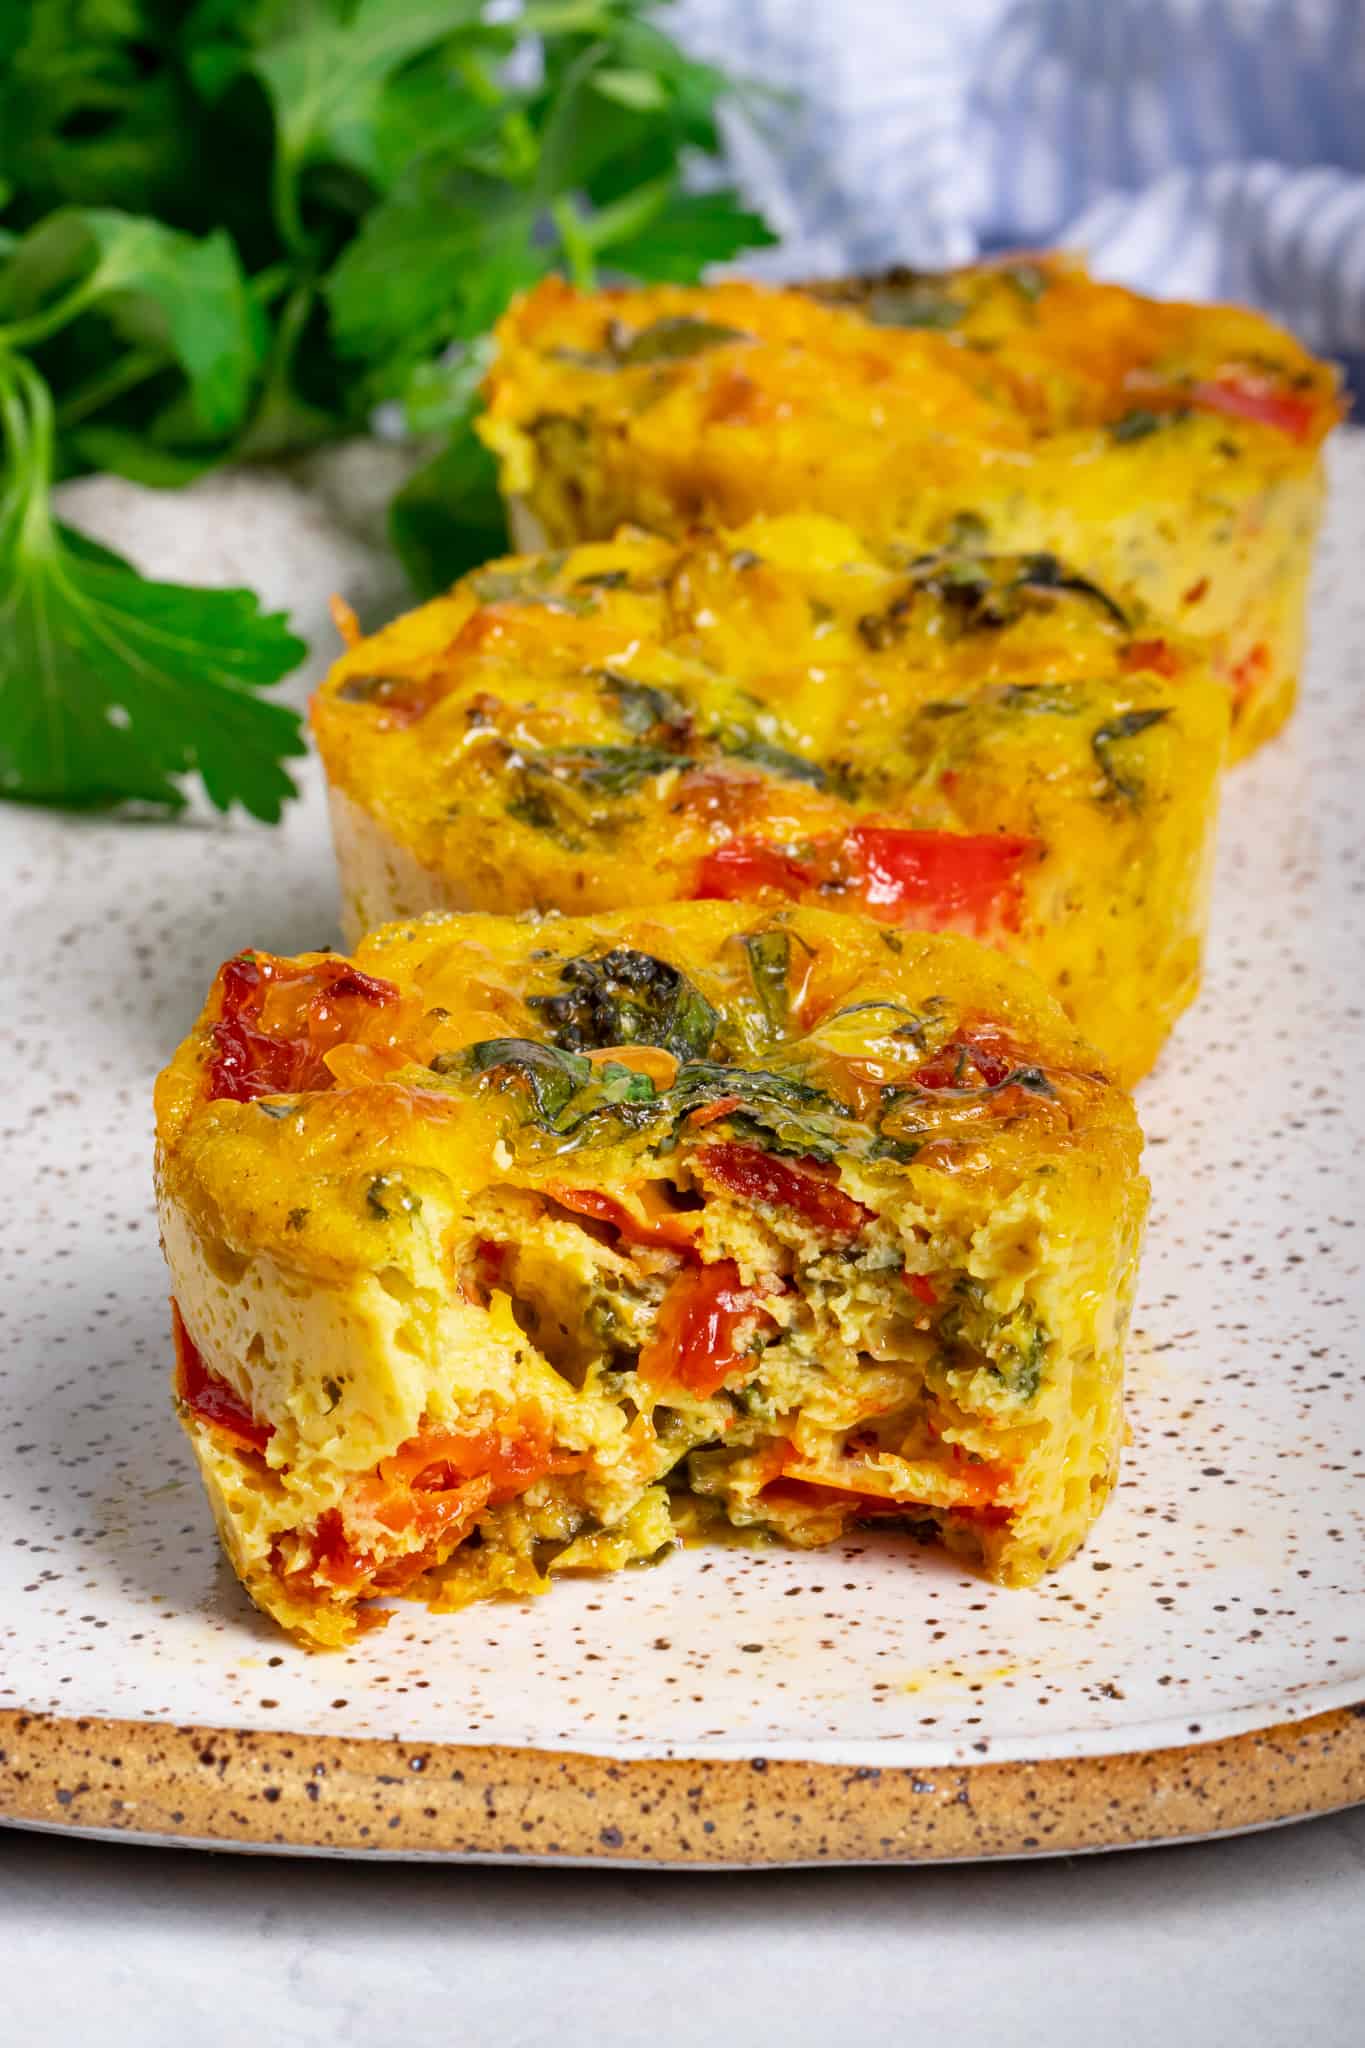 Vegan Egg Muffins with Just Egg